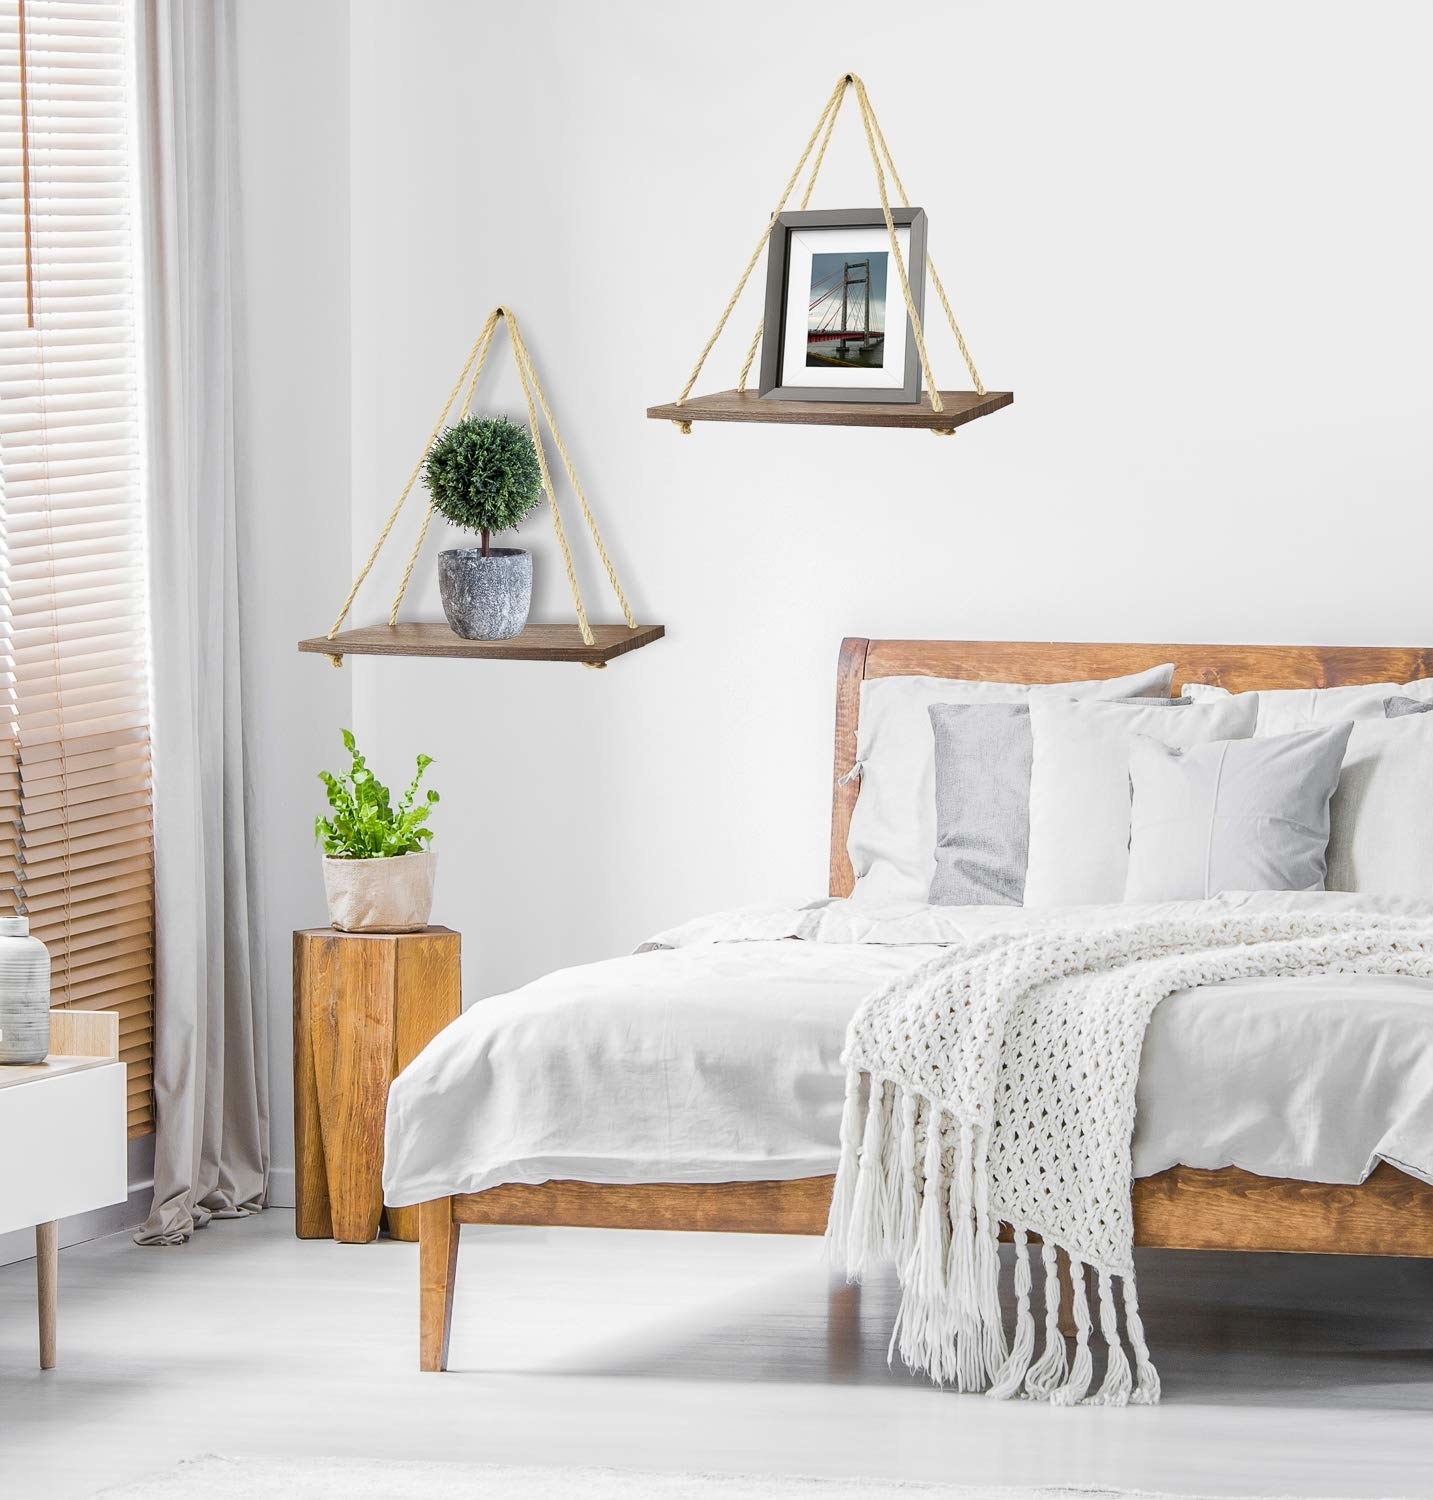 31 Things From Walmart That’ll Help You Redecorate Your Home While Actually Staying On Budget